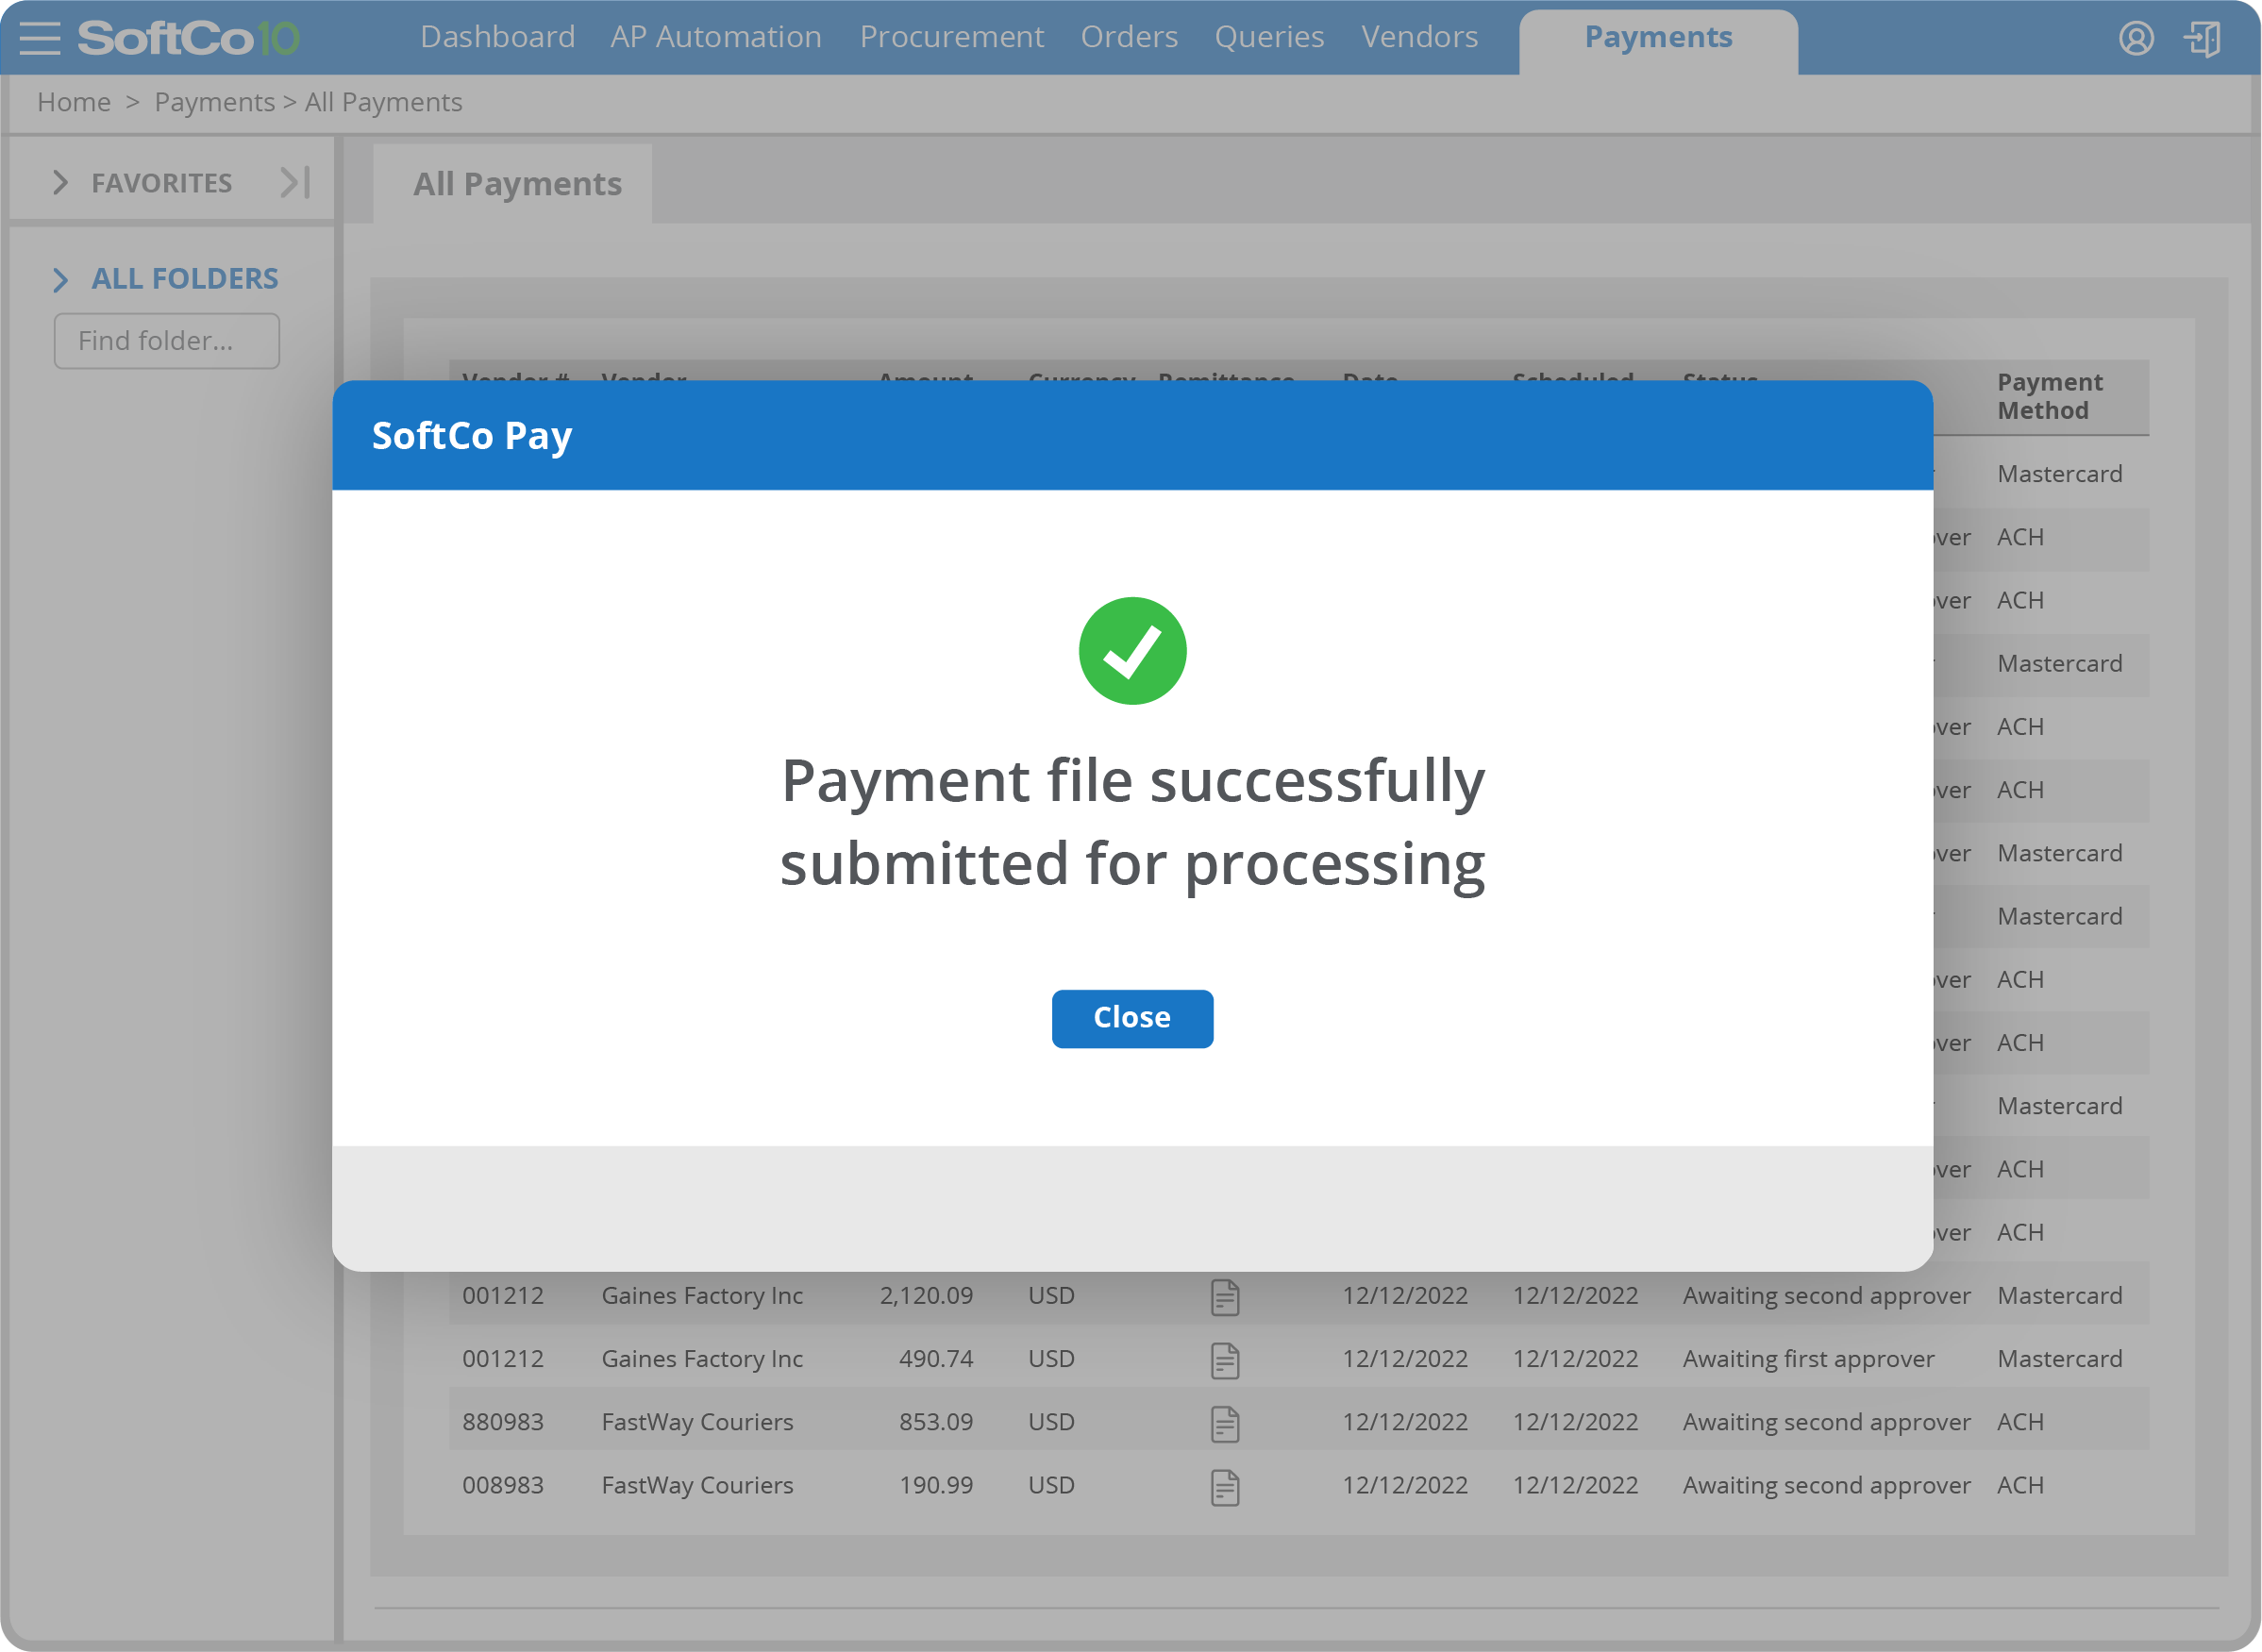 Fully Automate Your Payment Processes Through One Single Workflow for All Payment Types